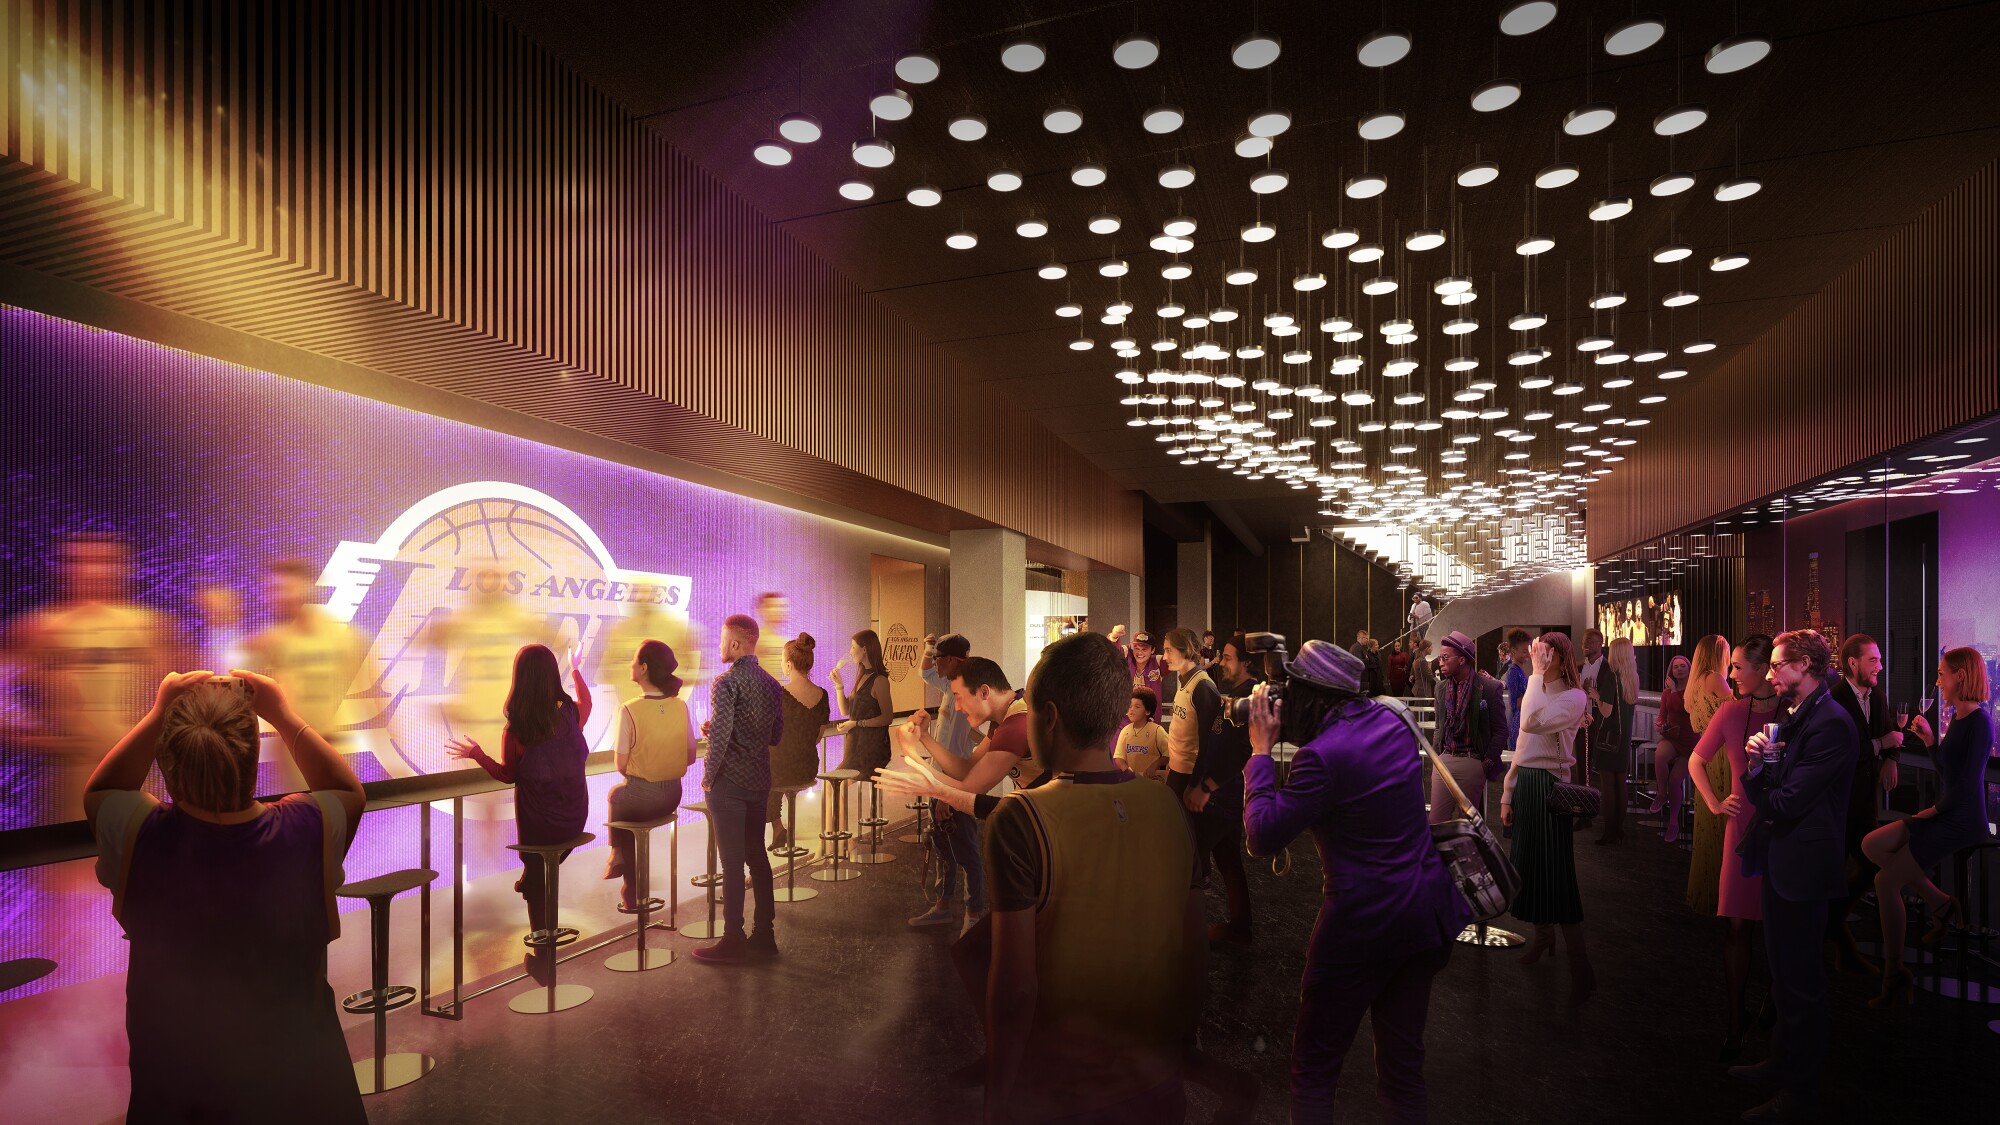 An artist's rendering of the future Tunnel Club at the Crypto.com Arena